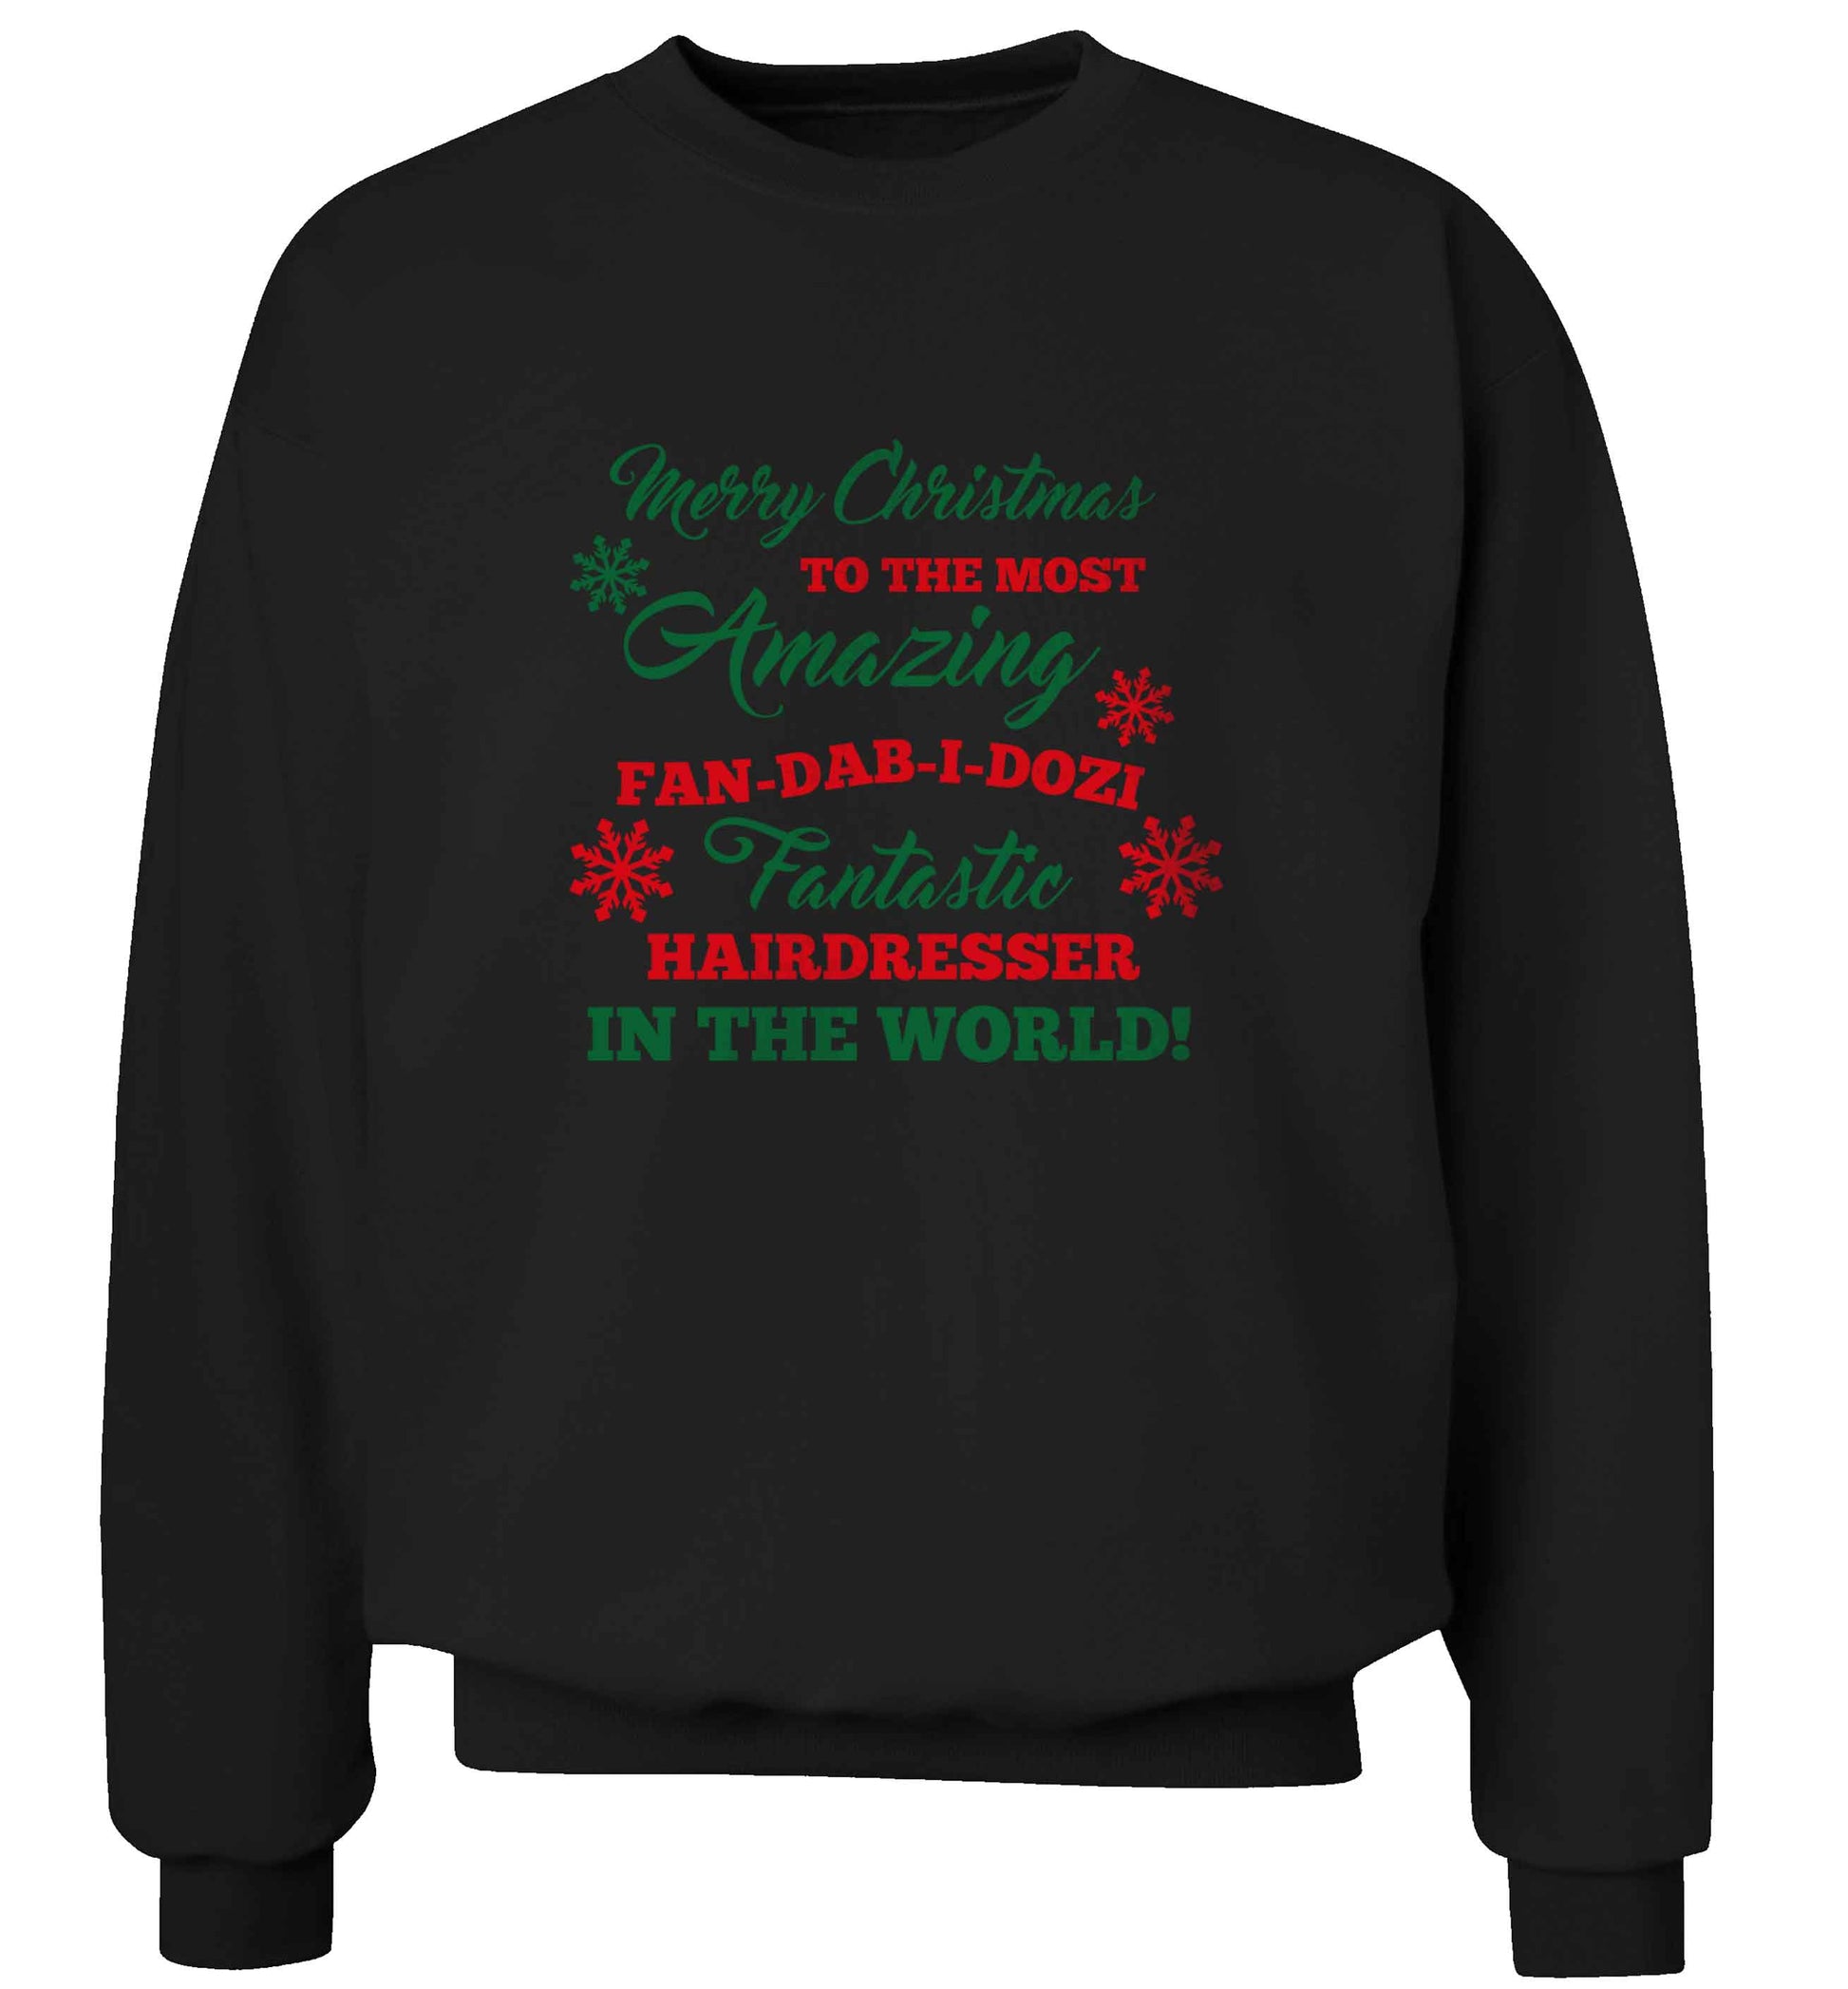 Merry Christmas to the most amazing dental assistant in the world! adult's unisex black sweater 2XL